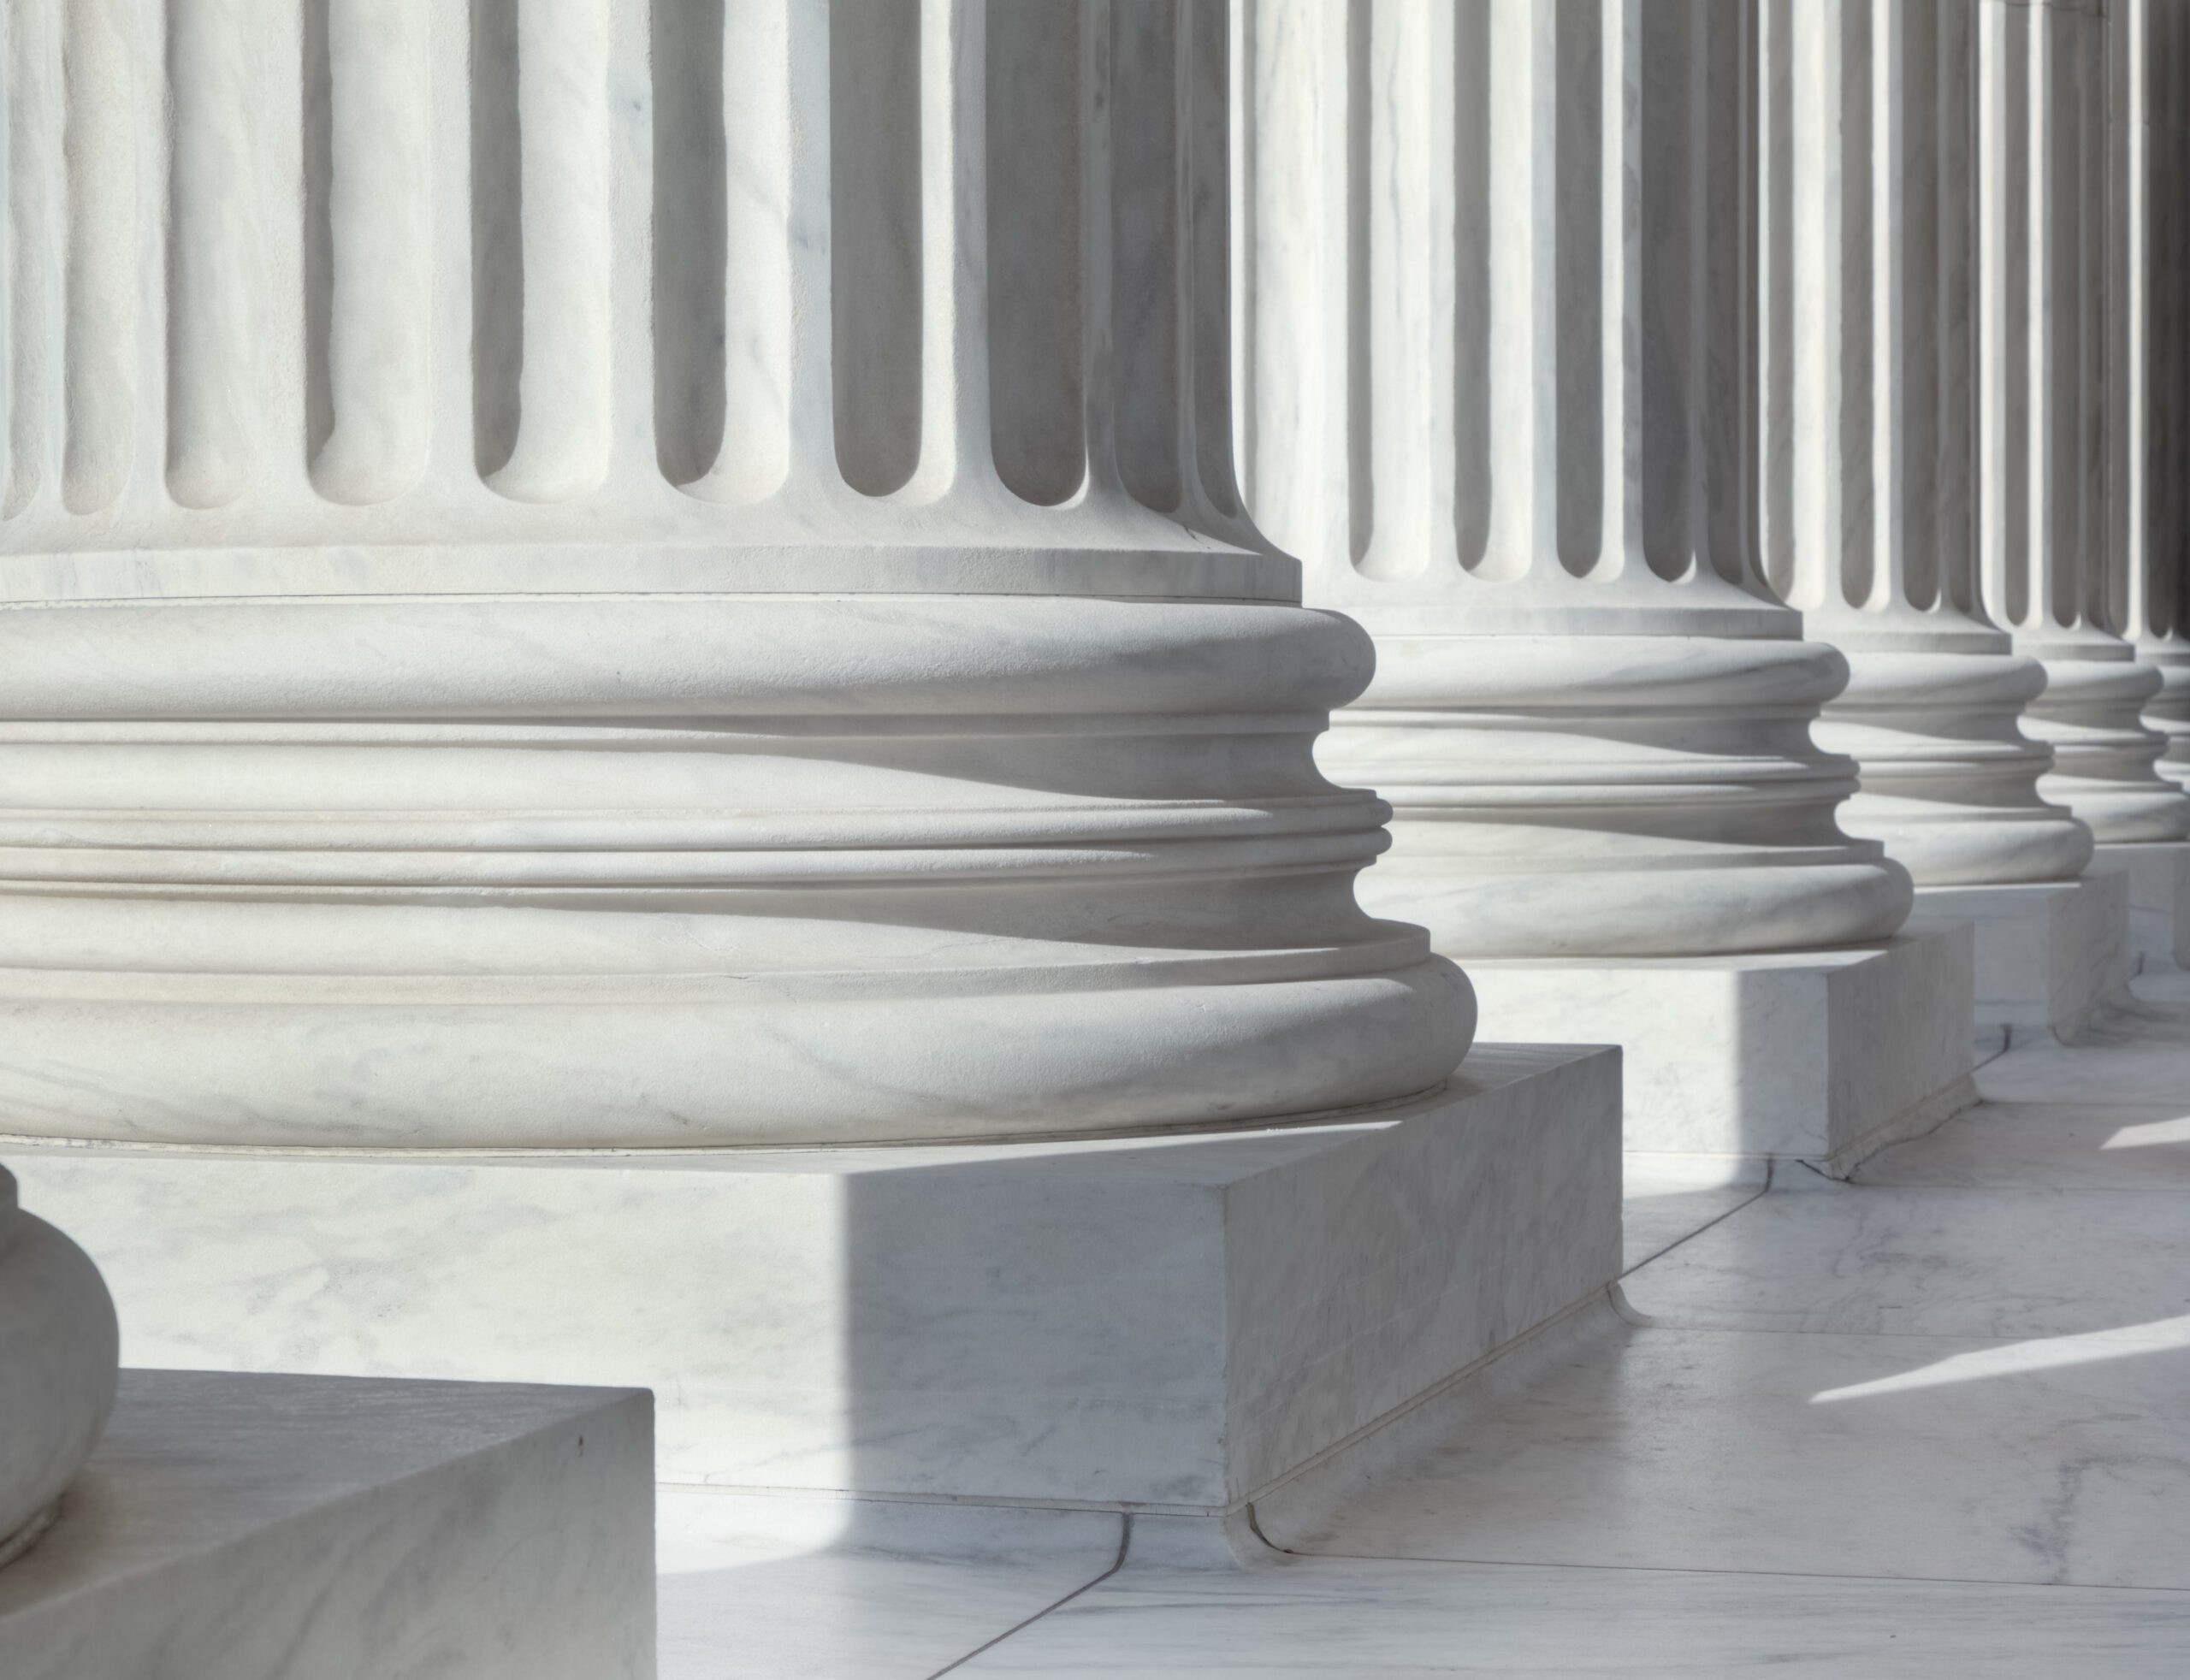 An image of architectural detail from the United States Supreme Court building. There are circular pillars visible in a row.